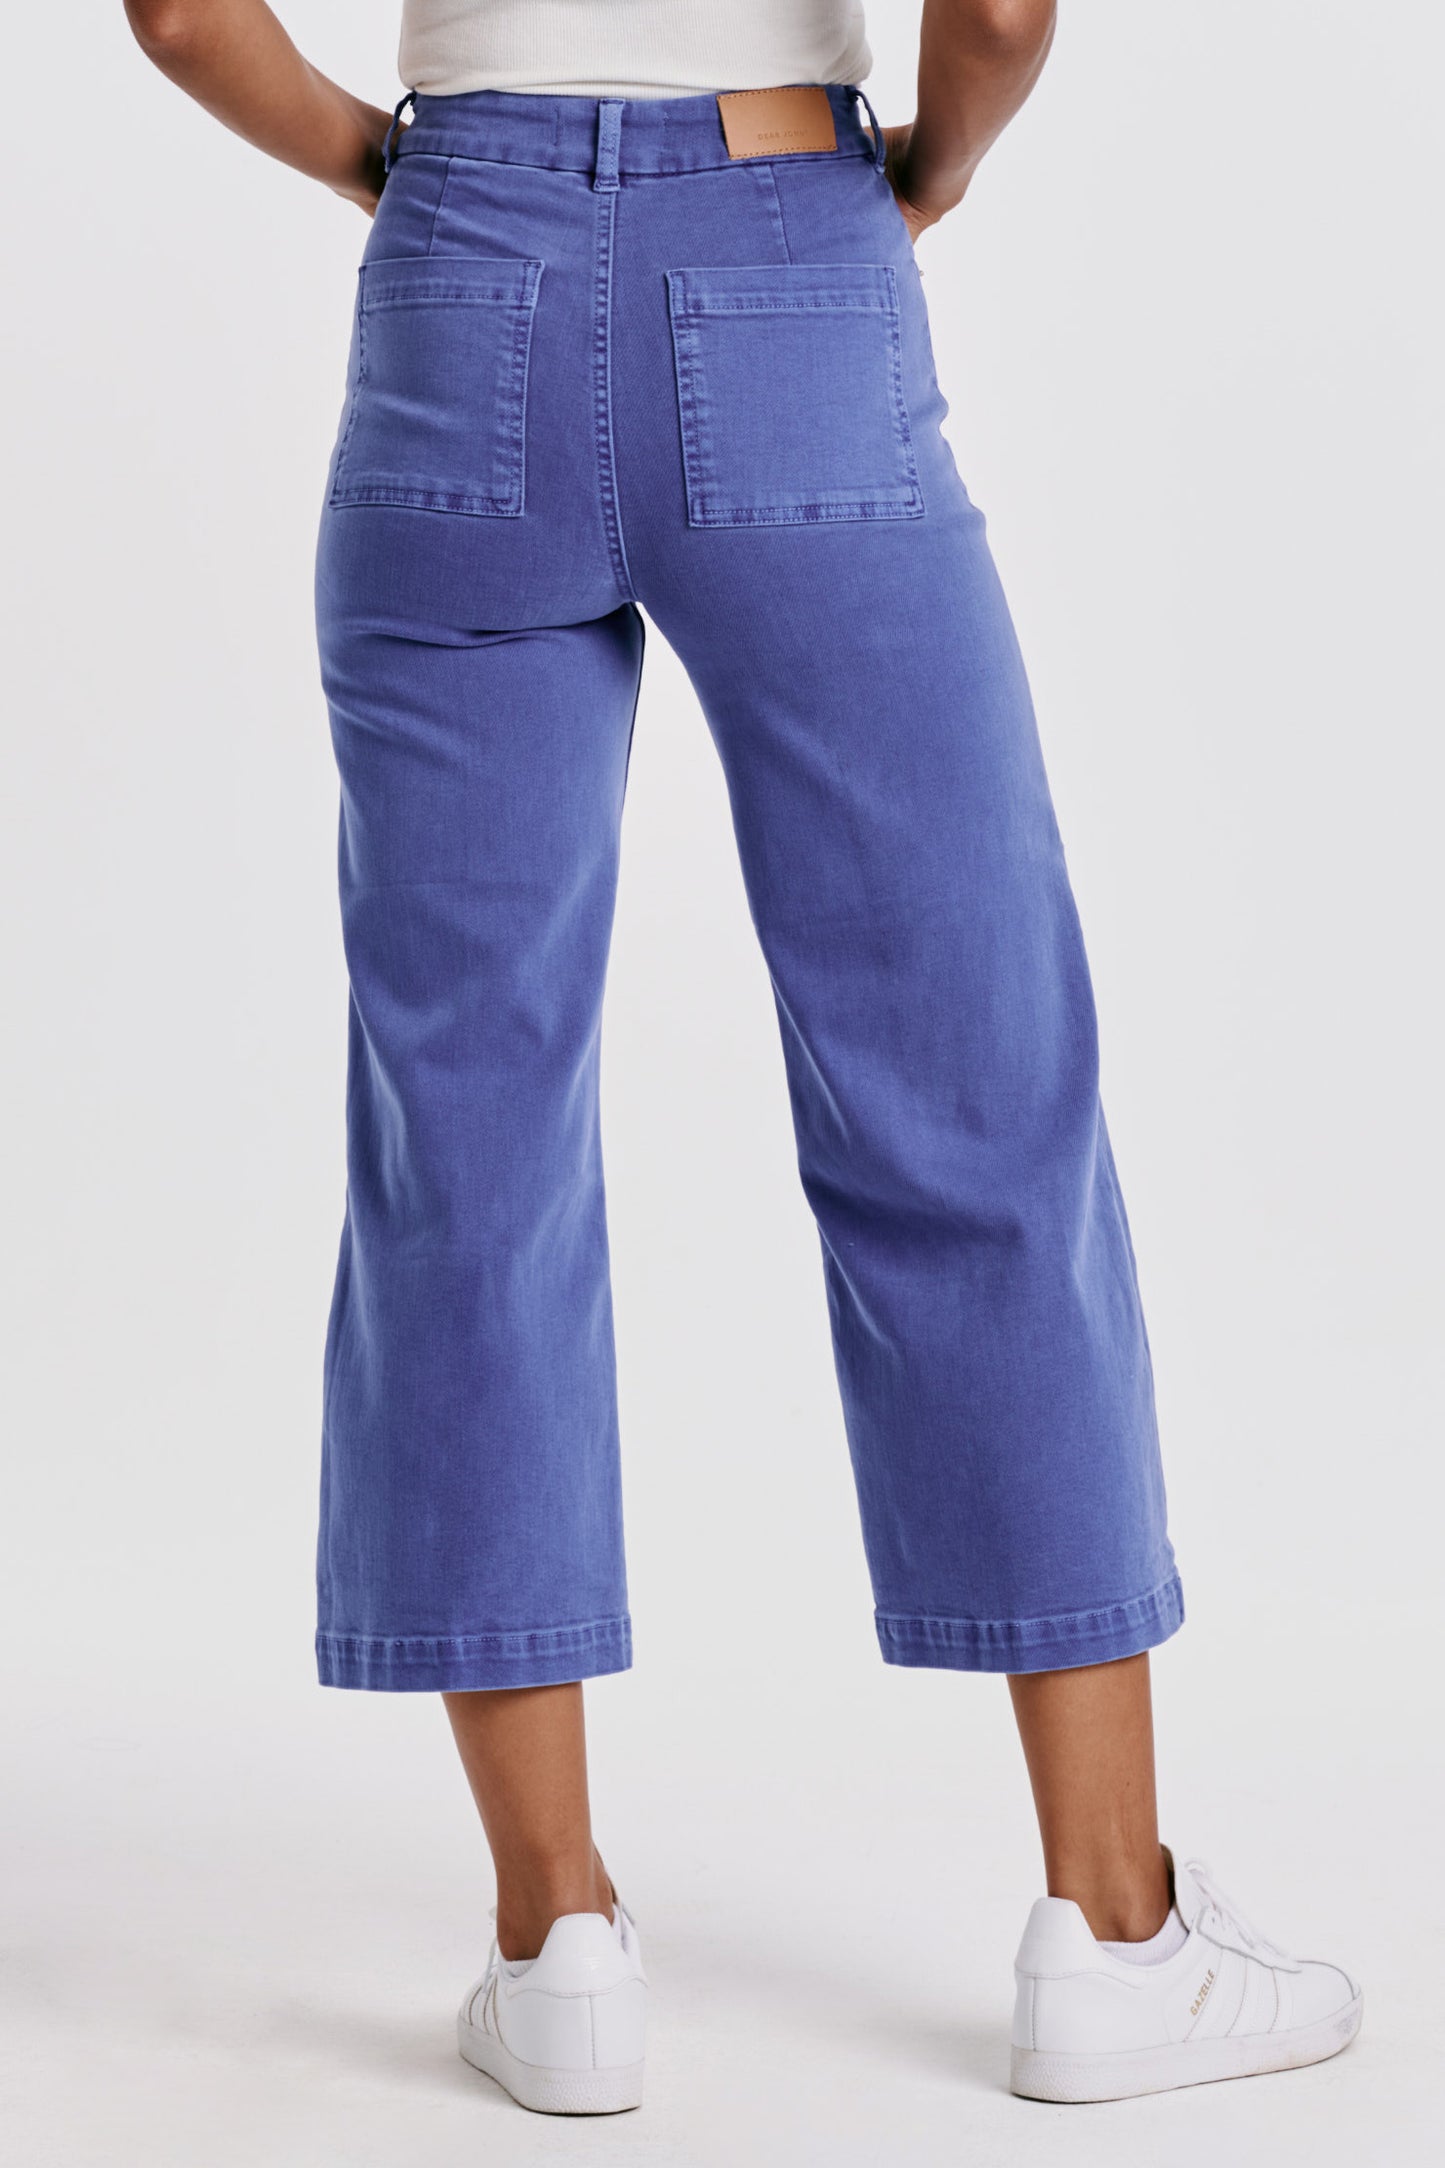 Audrey High Rise Jeans in Galactic Blue - Brazos Avenue Market 